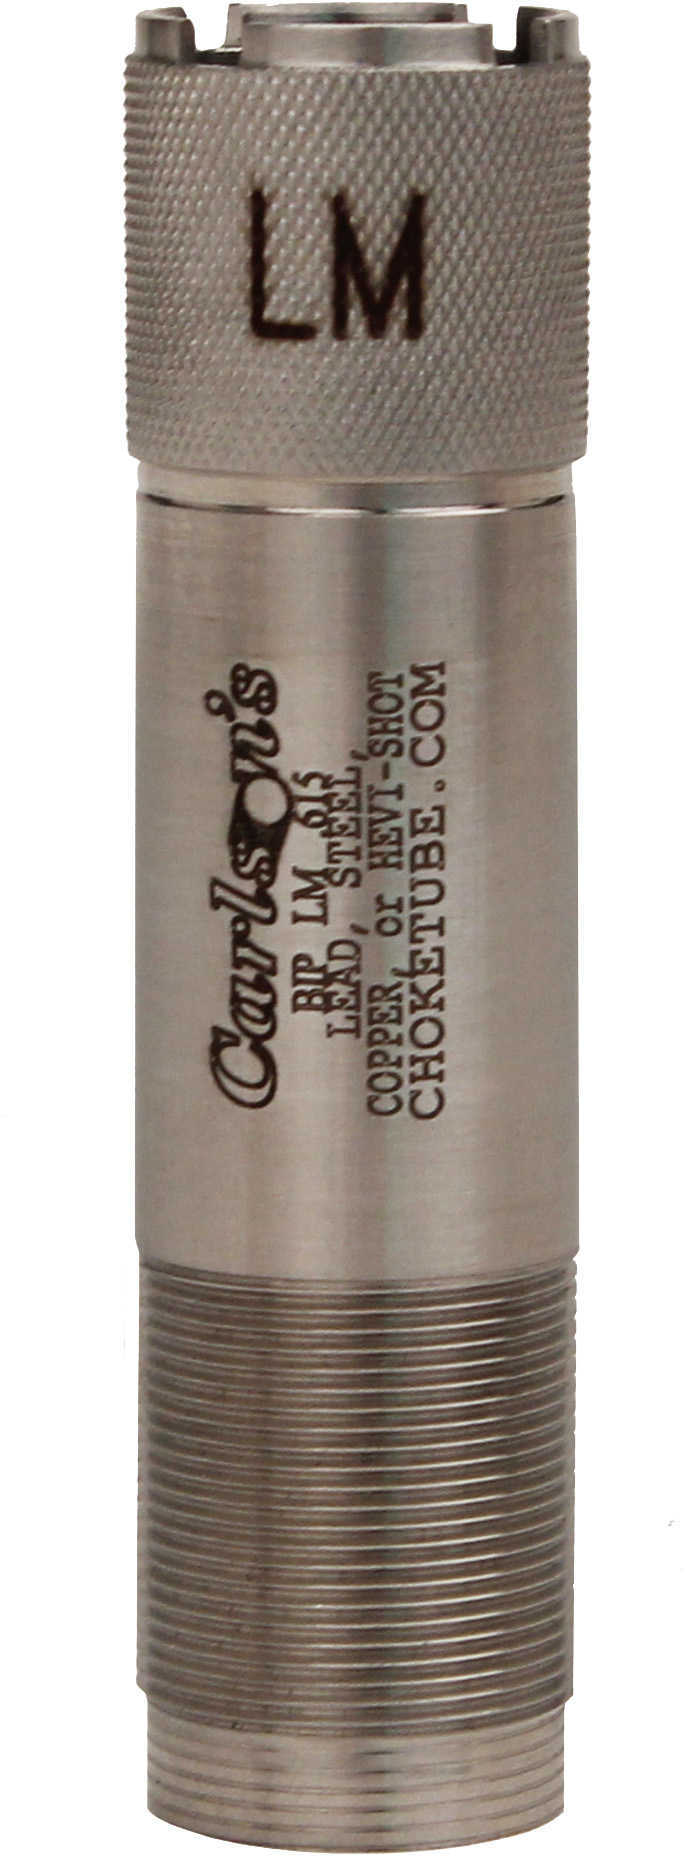 Carlsons Browning Inv+ Choke Tubes Sporting Clays, 20 Gauge, Light Modified .615 18874